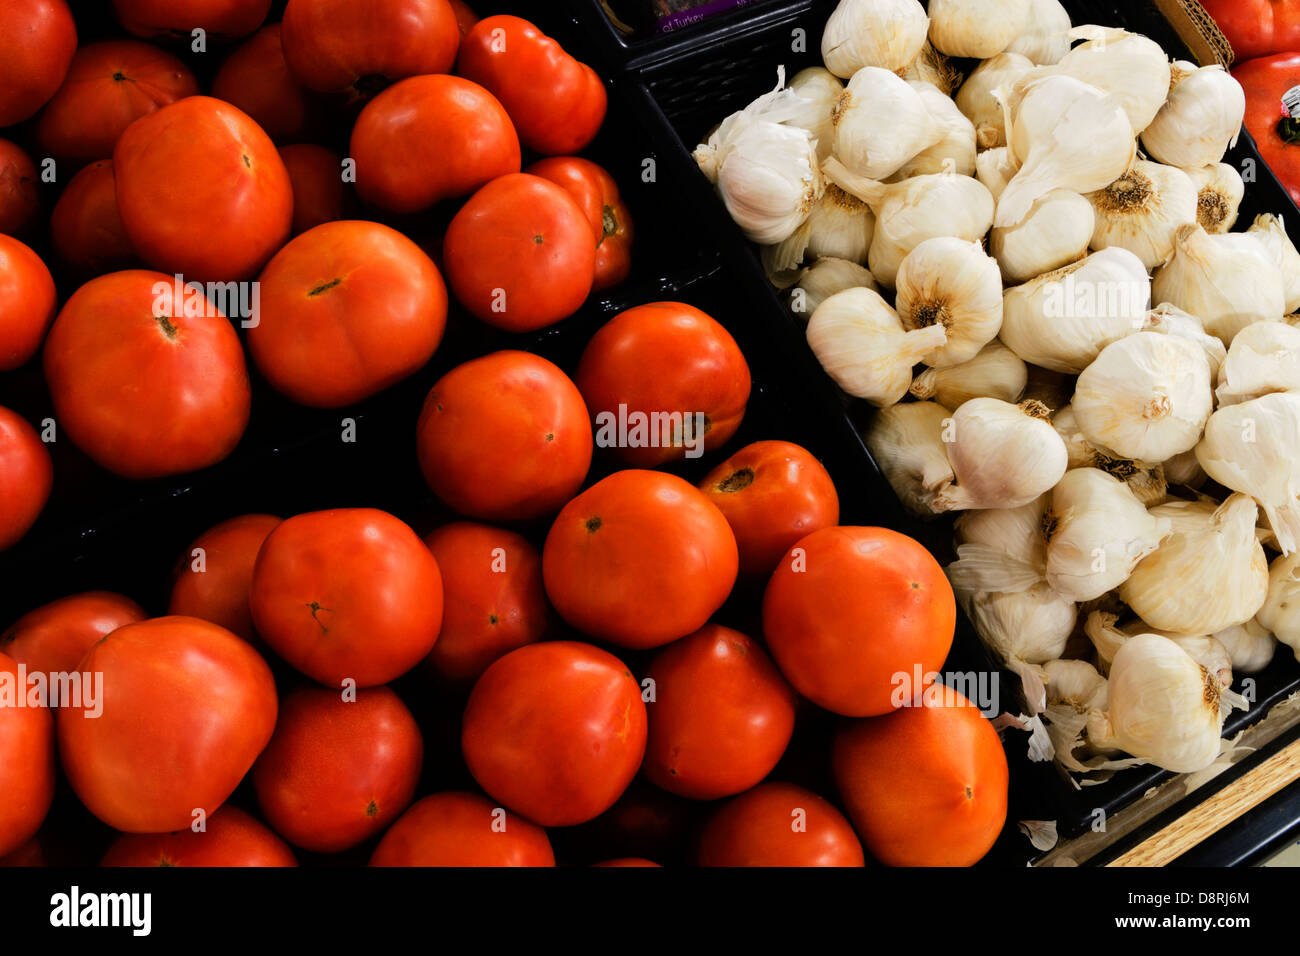 Tomatoes and garlic on display in a family owned grocery store. Stock Photo